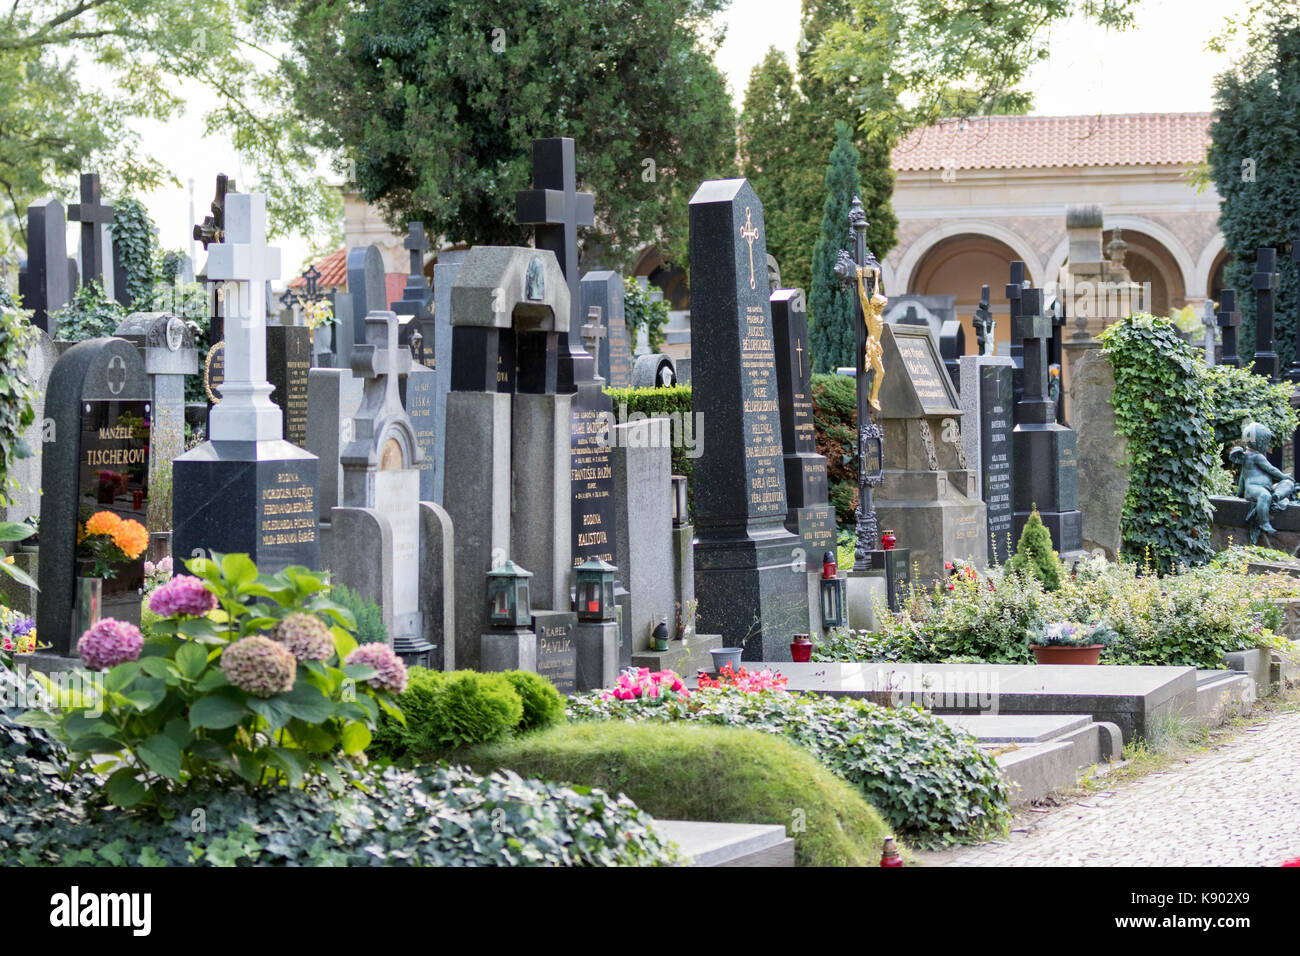 Prague, Czech Republic - August 21, 2017: Tombs of celebrity characters in the Vysehrad cemetery Stock Photo